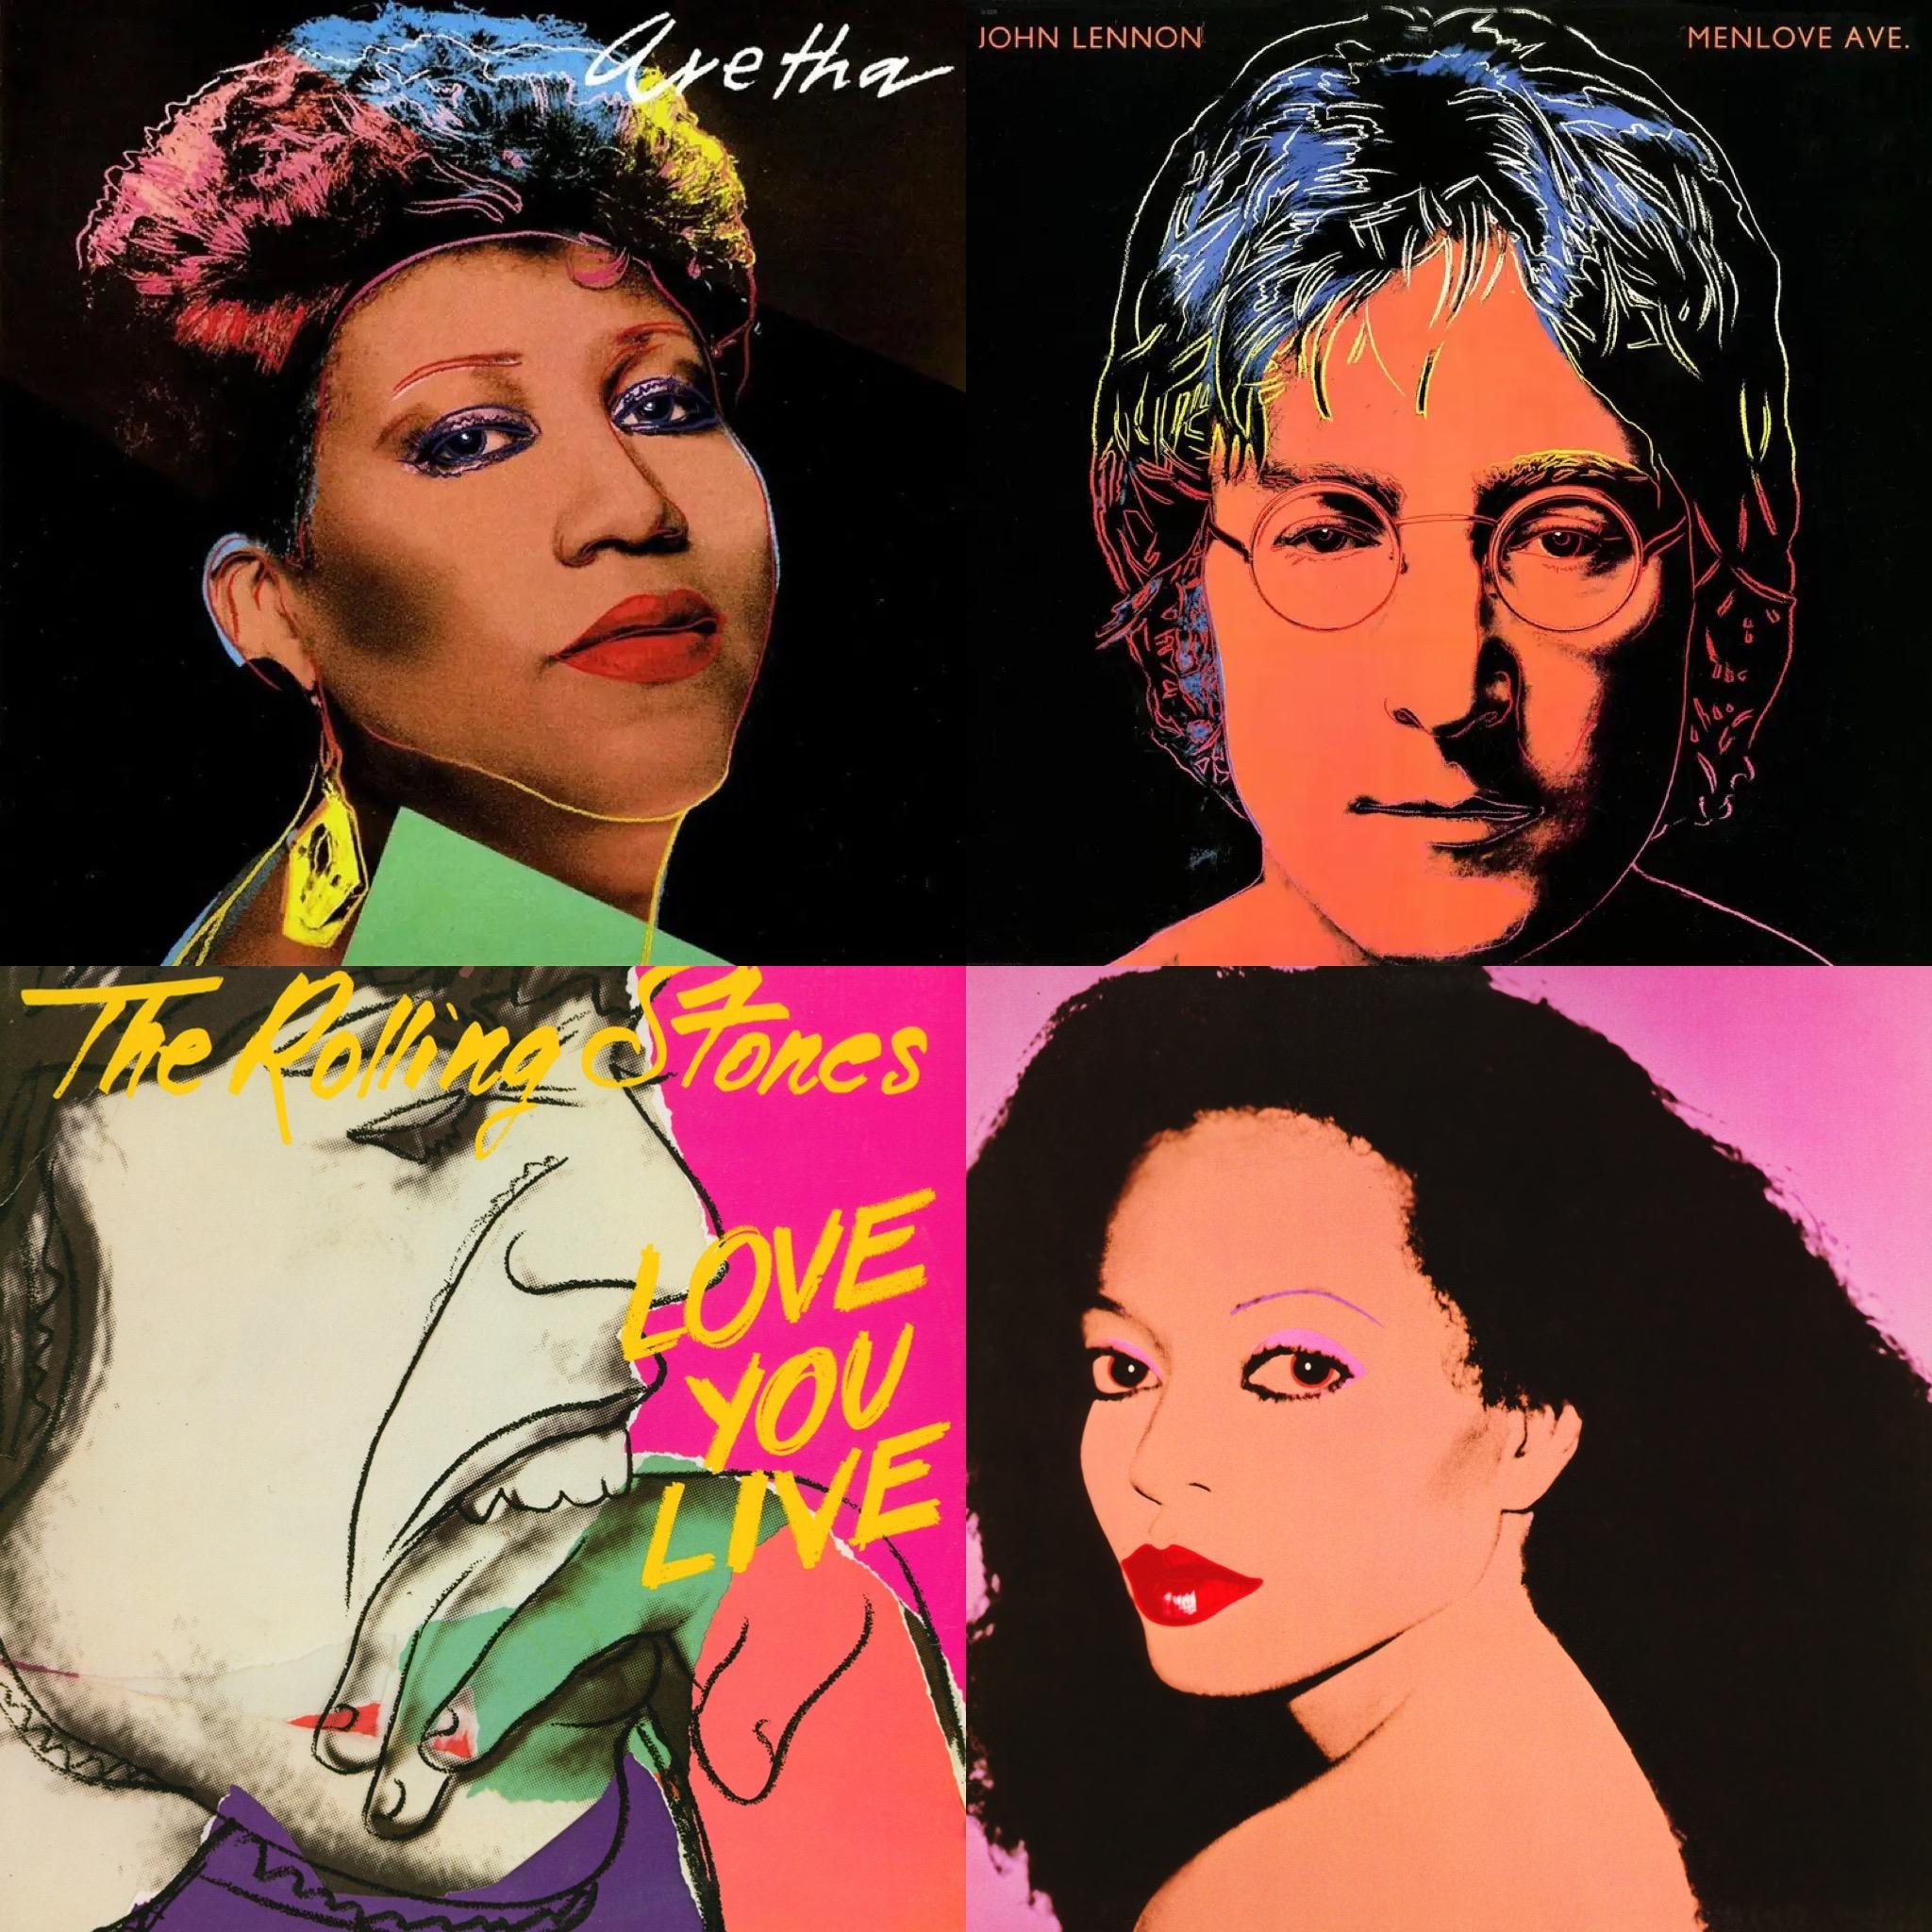 A collection of record covers designed by Andy Warhol during the years 1977 to 1986.
Sold as a set of 4.
Records included with their covers.
Offset lithograph on four individual record album covers.
Records include Diana Ross, Aretha Franklin, The